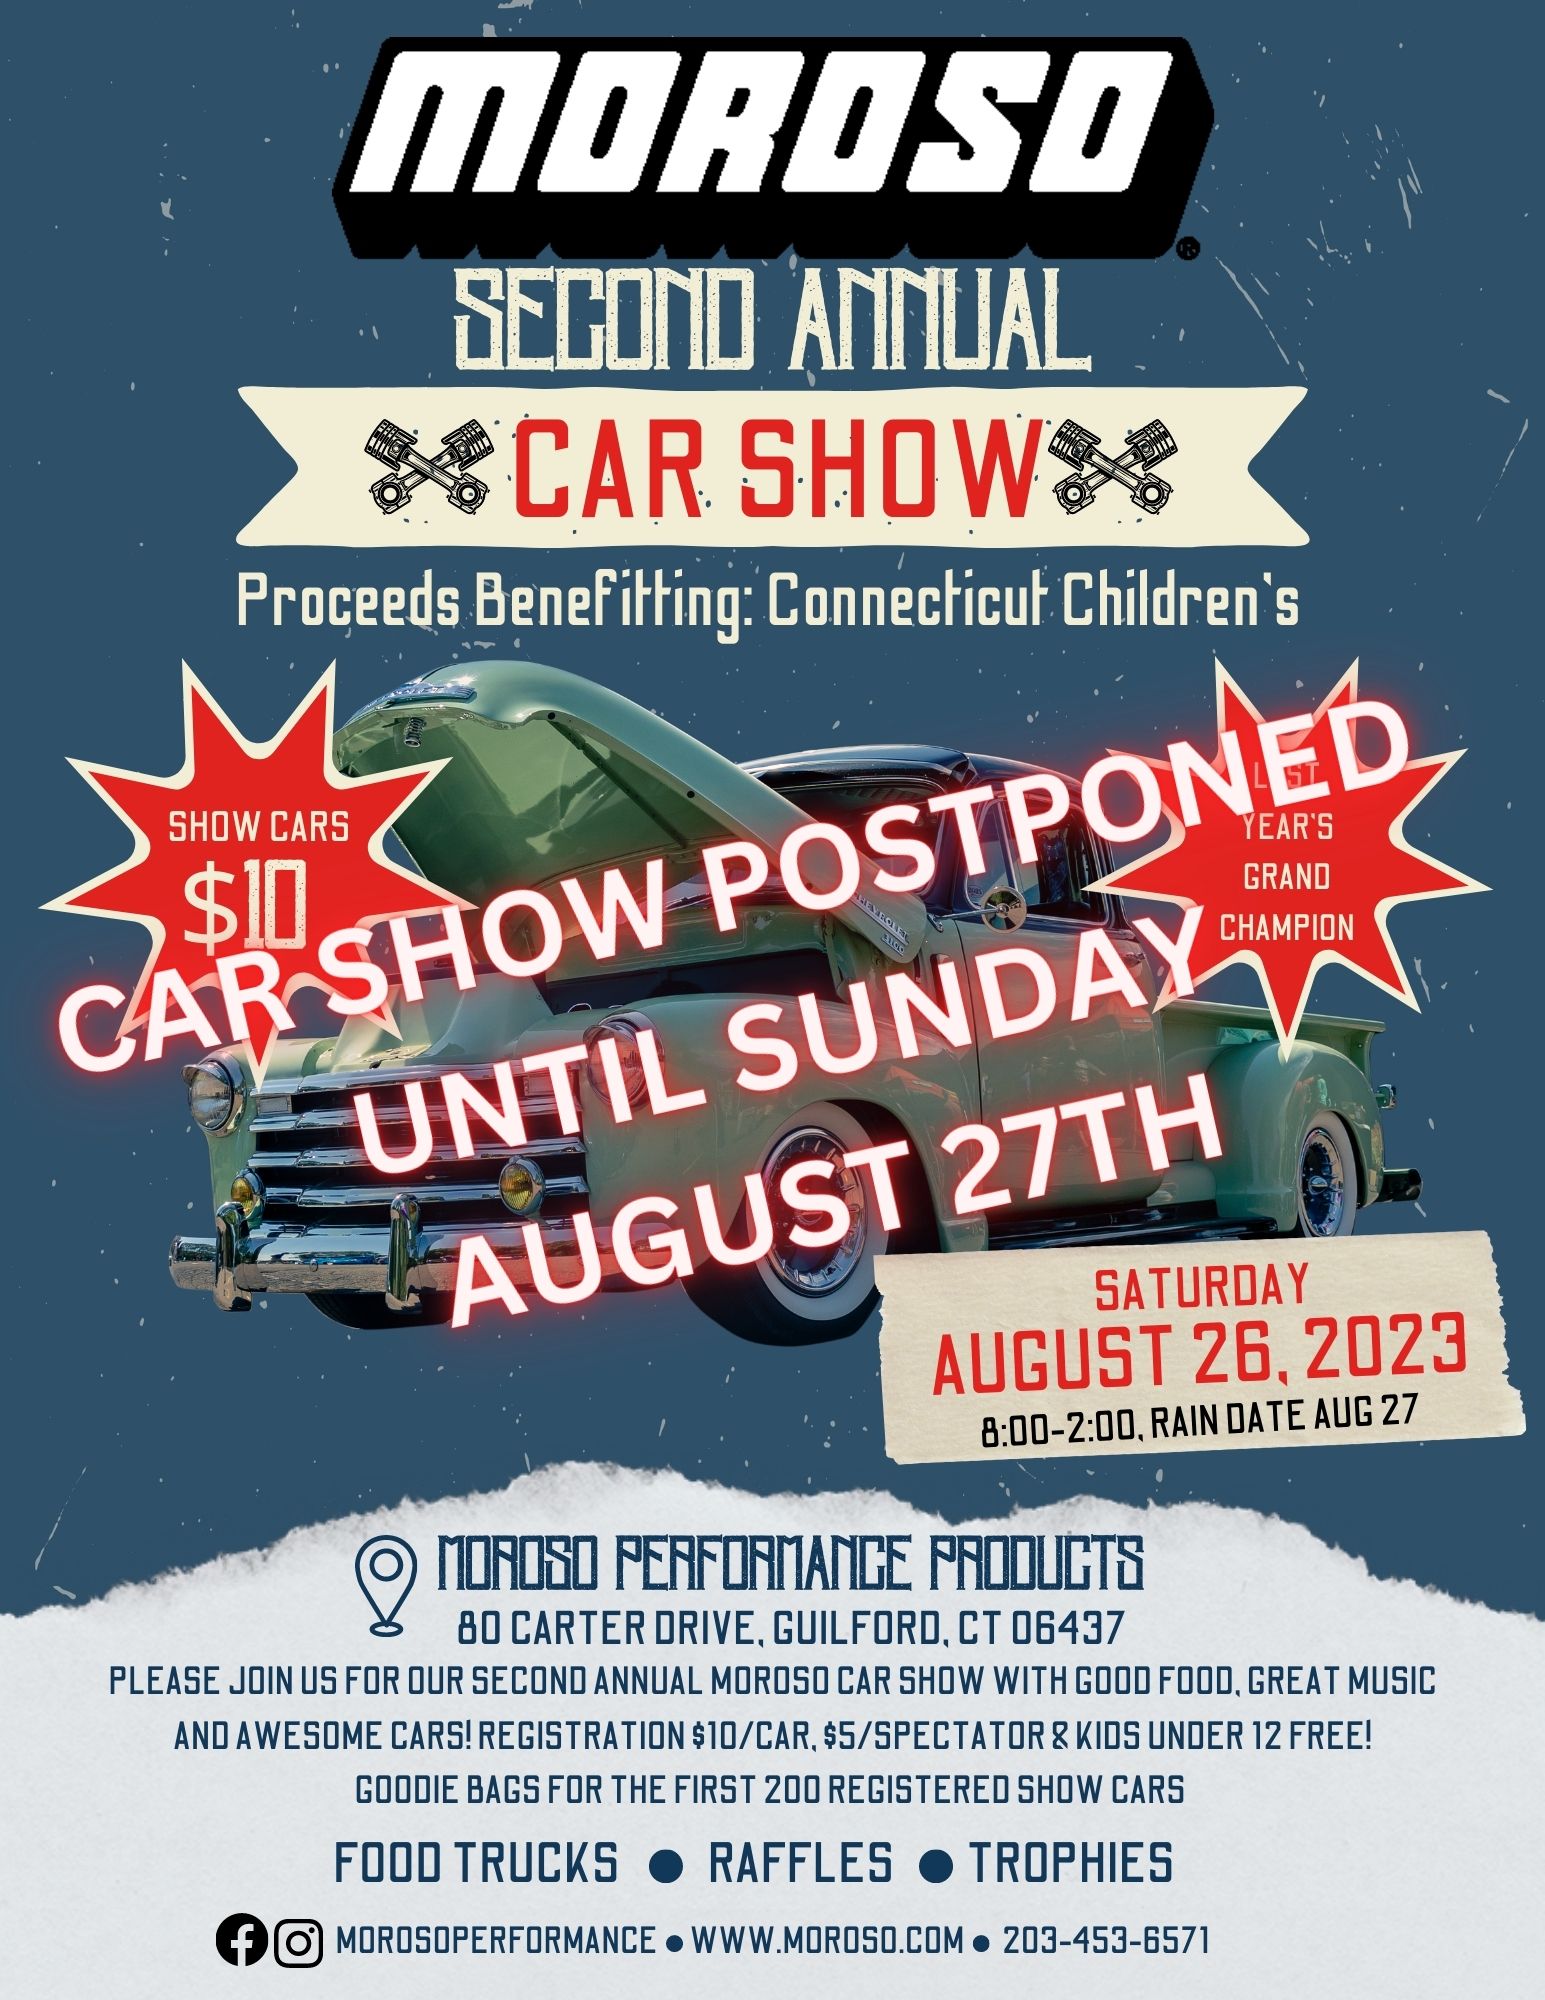 Moroso Performance Second Annual Car Show - Benefiting Connecticut Children's!